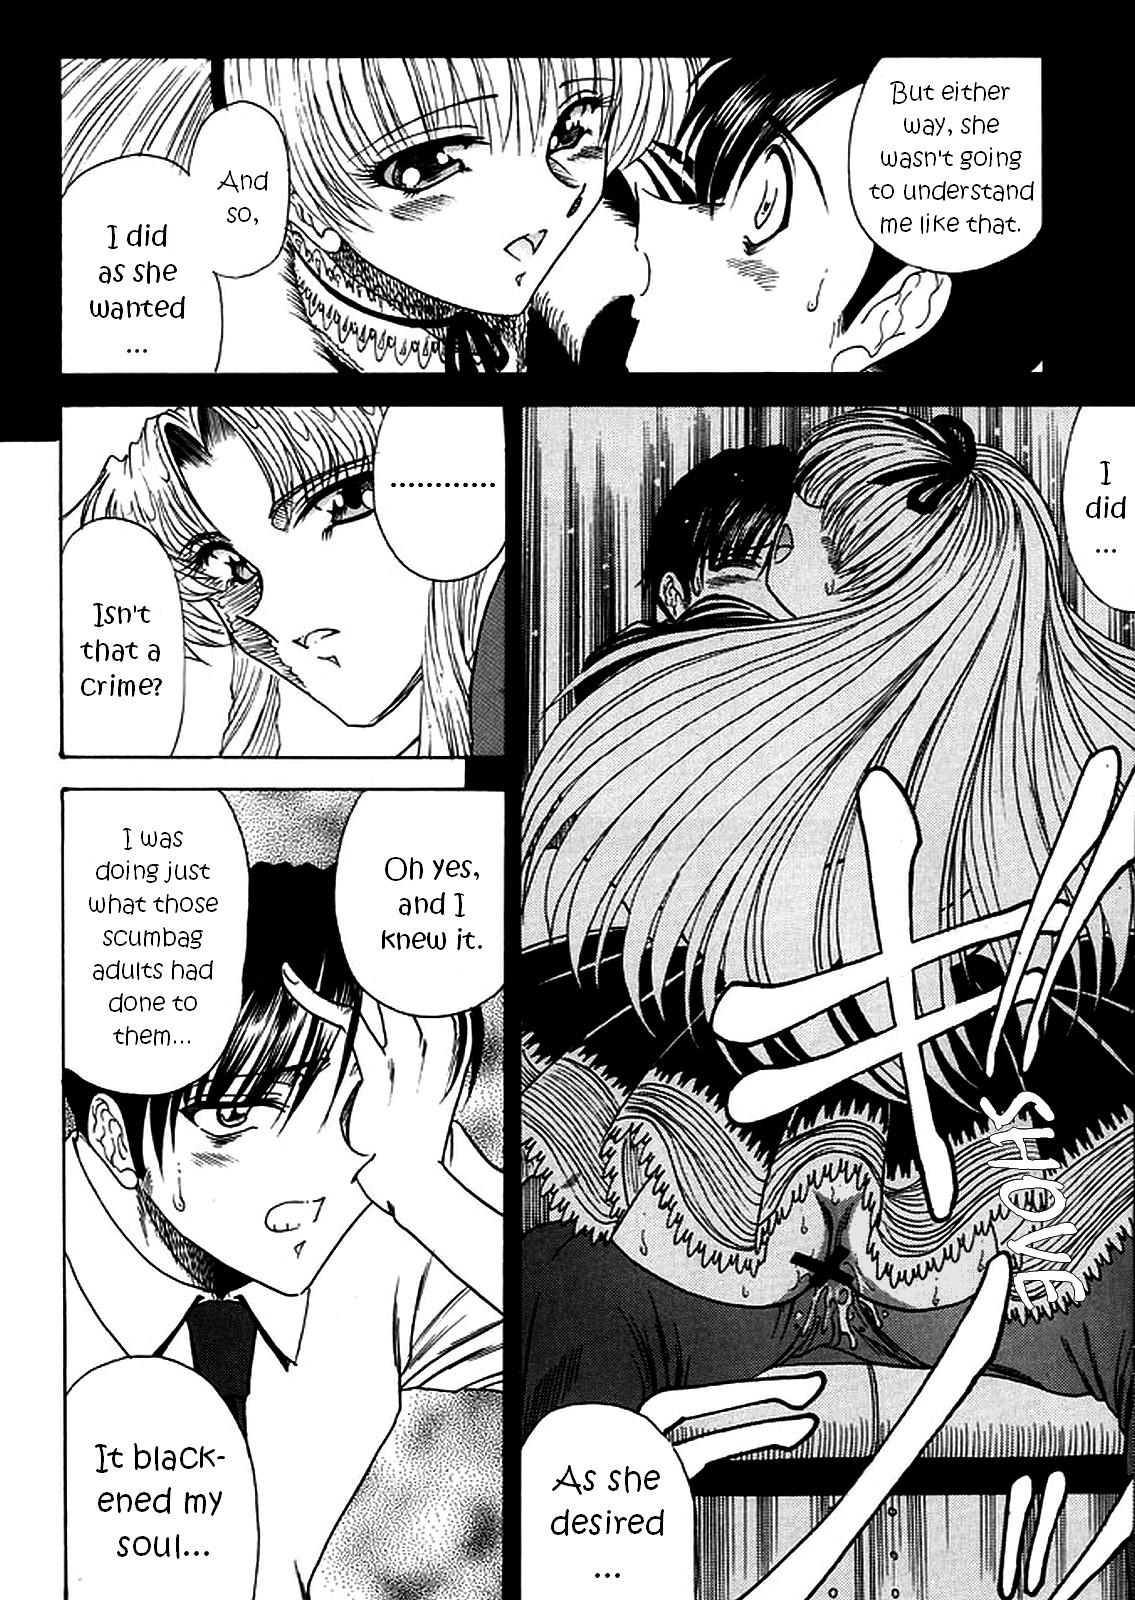 Passion ZONE 40 A shot of the requiem - Black lagoon Missionary Position Porn - Page 10